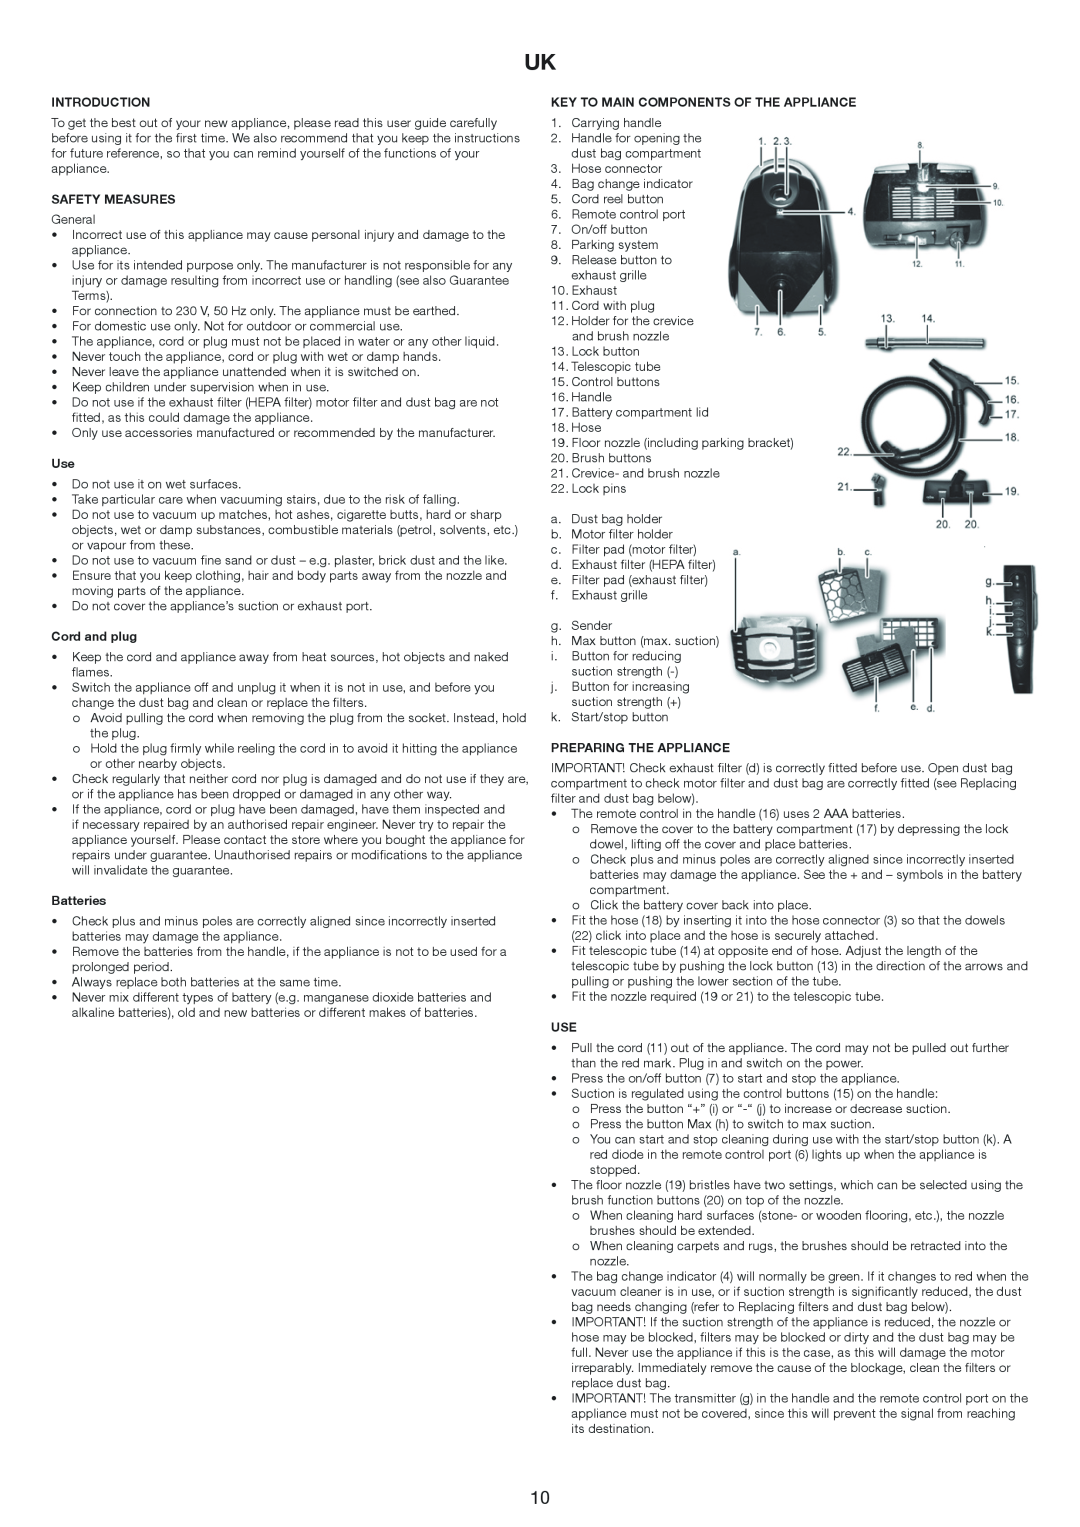 Melissa 640-174 manual Introduction, Safety Measures, Cord and plug, Batteries, Key To Main Components Of The Appliance 